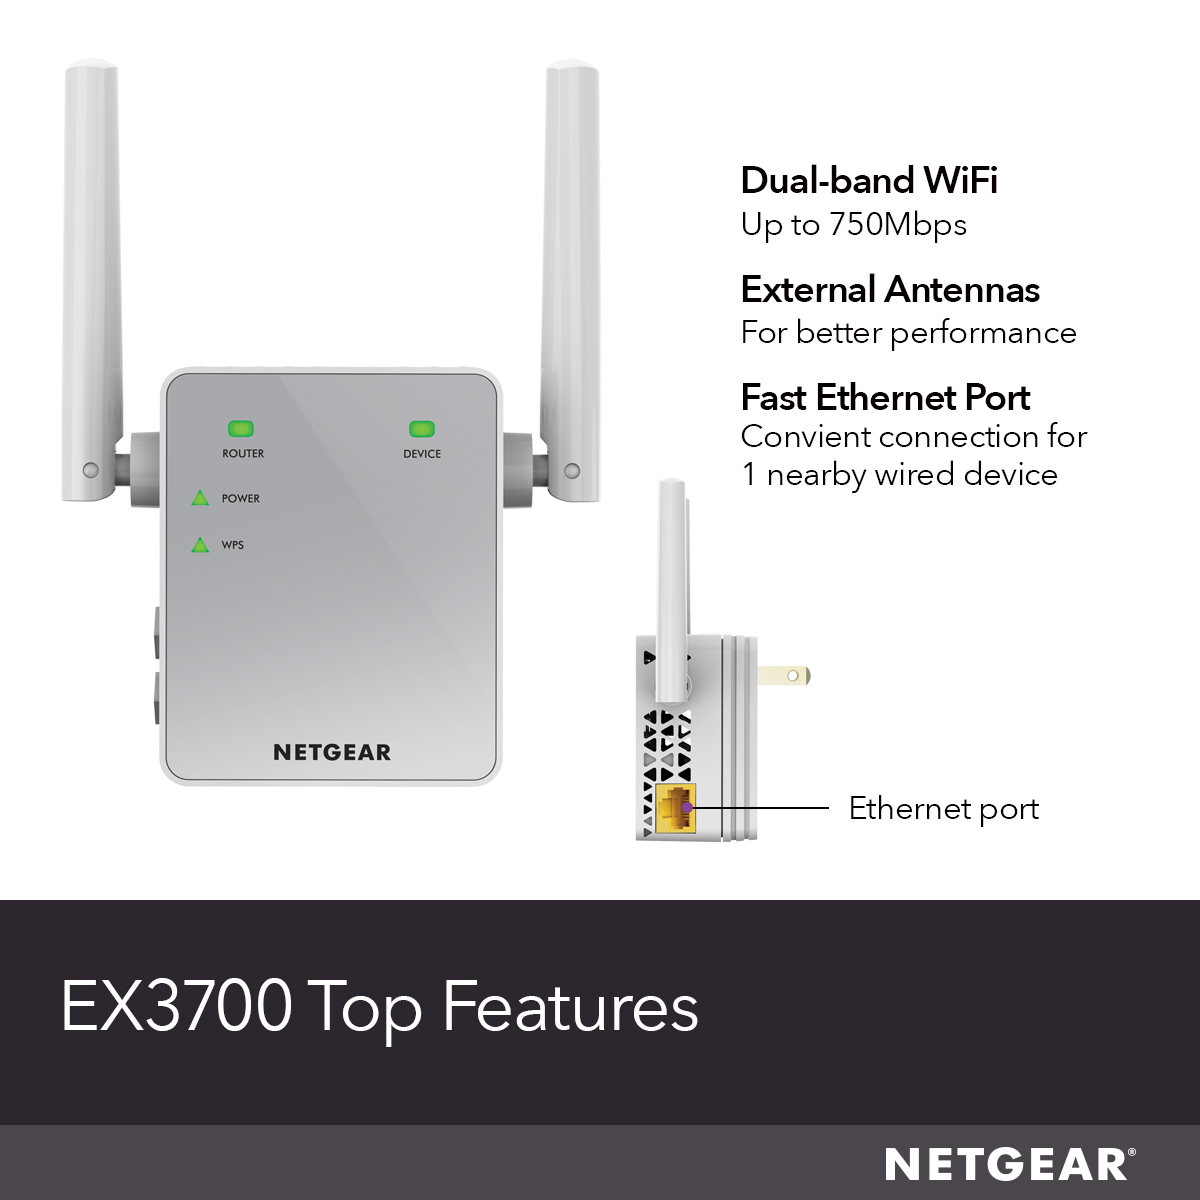 NETGEAR - AC750 WiFi Range Extender and Signal Booster, Wall-Plug, 750Mbps (EX3700) - image 5 of 7